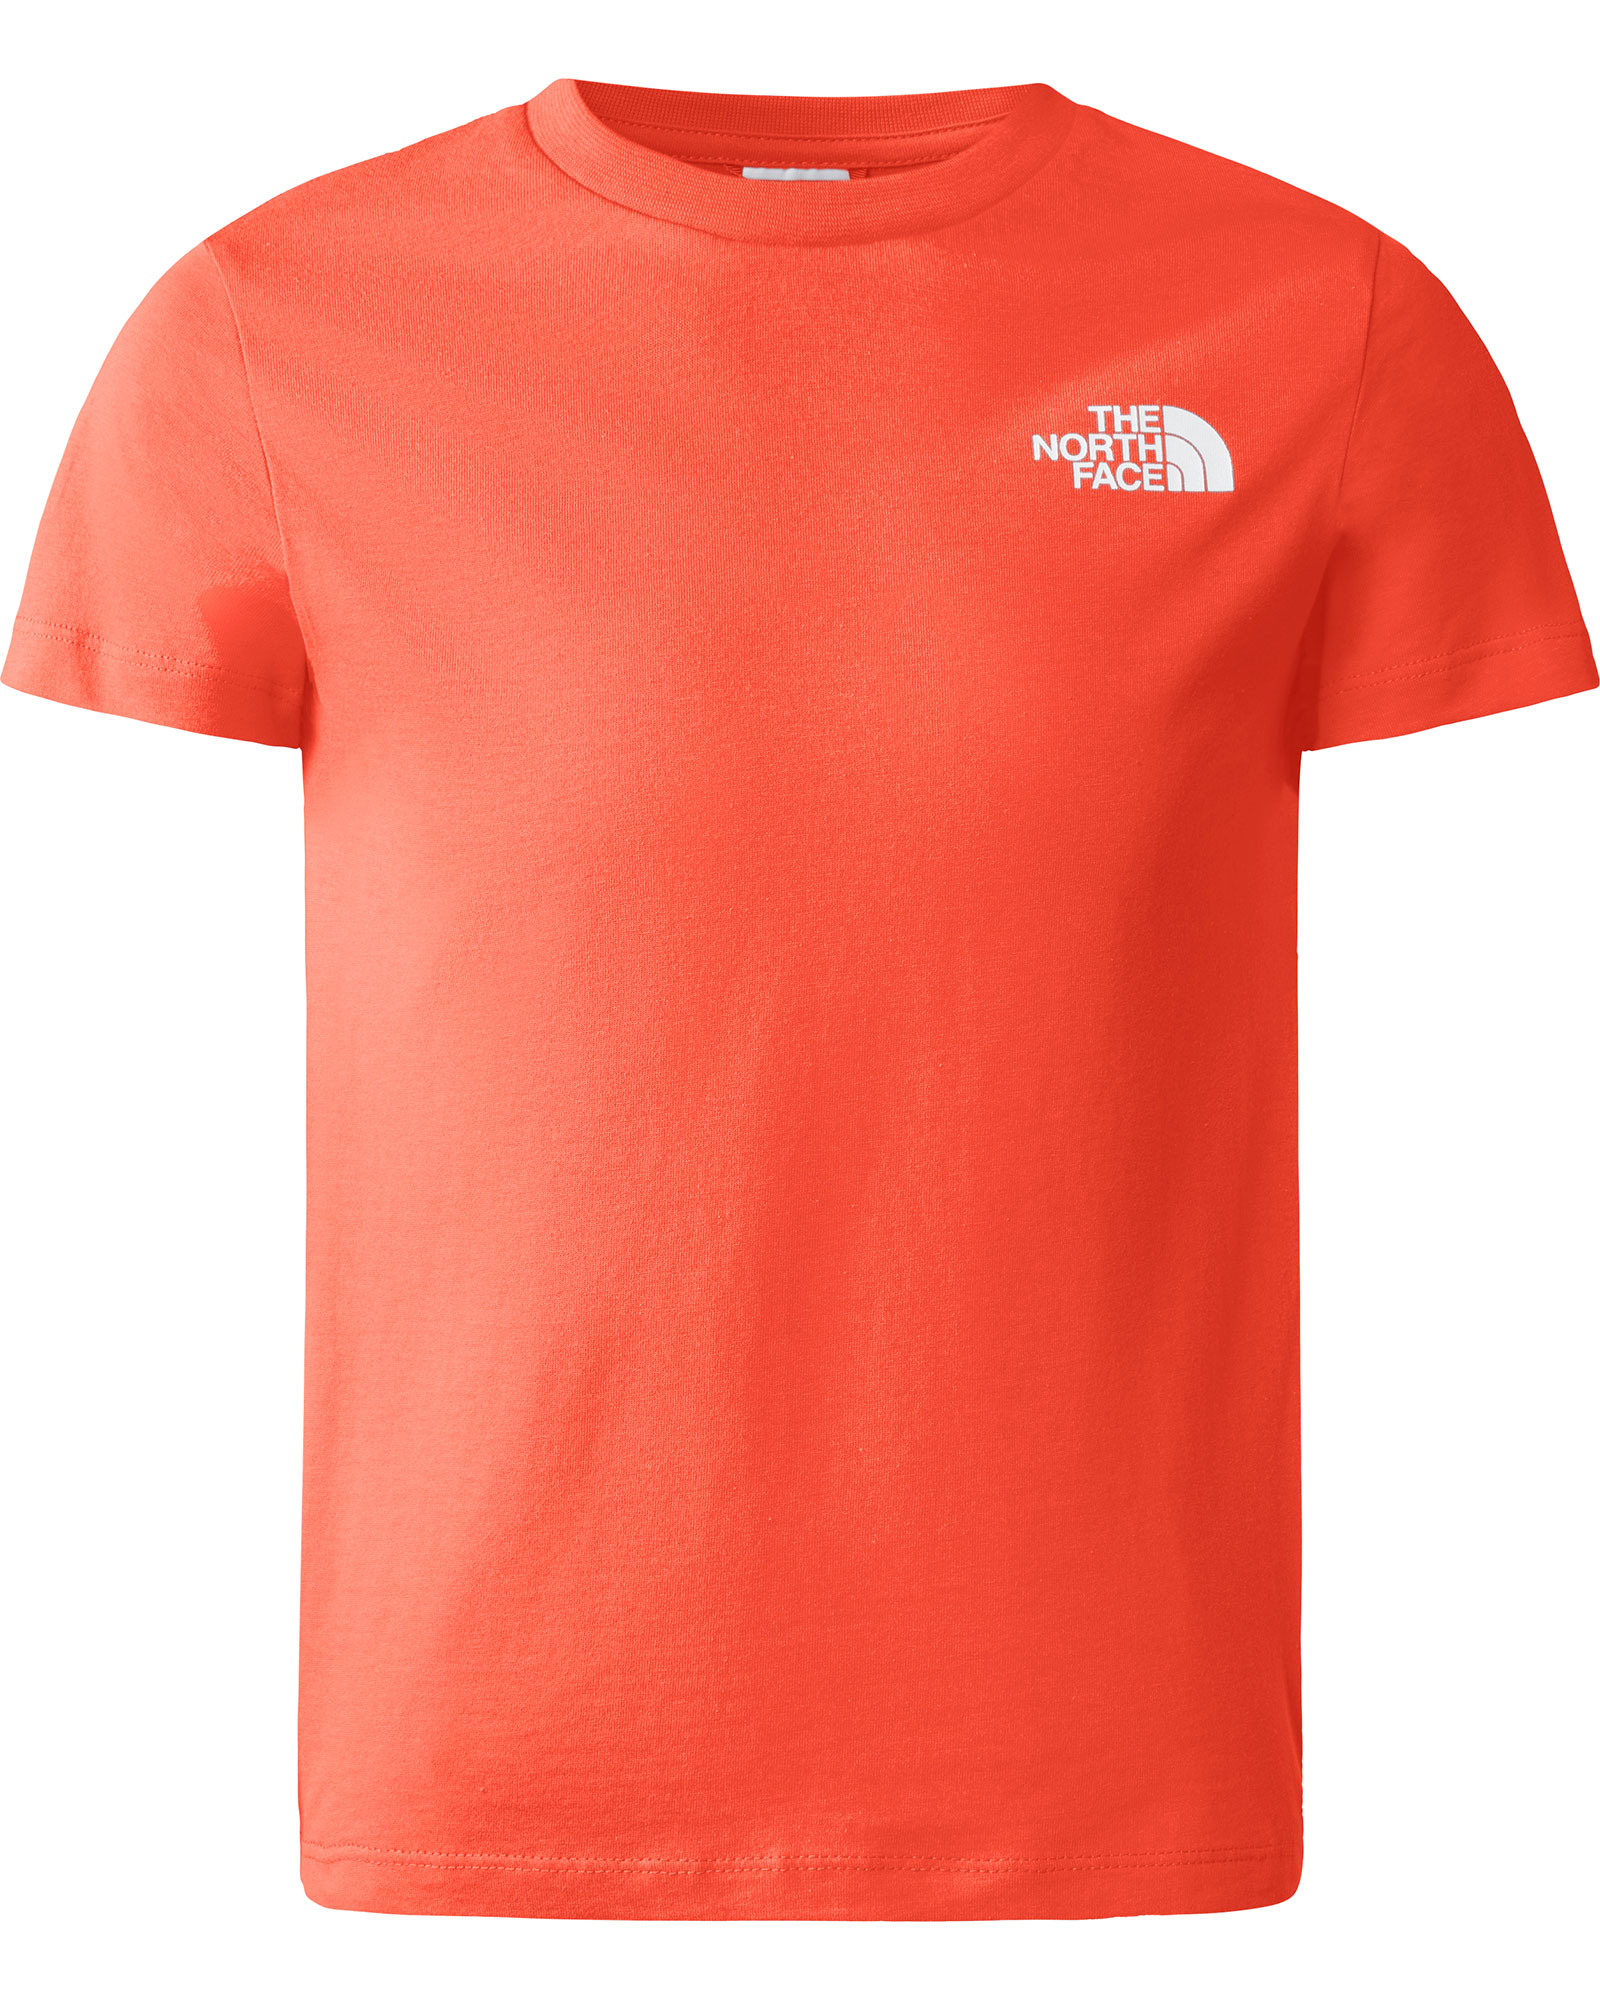 The North Face Youth Simple Dome T Shirt - Retro Orange L